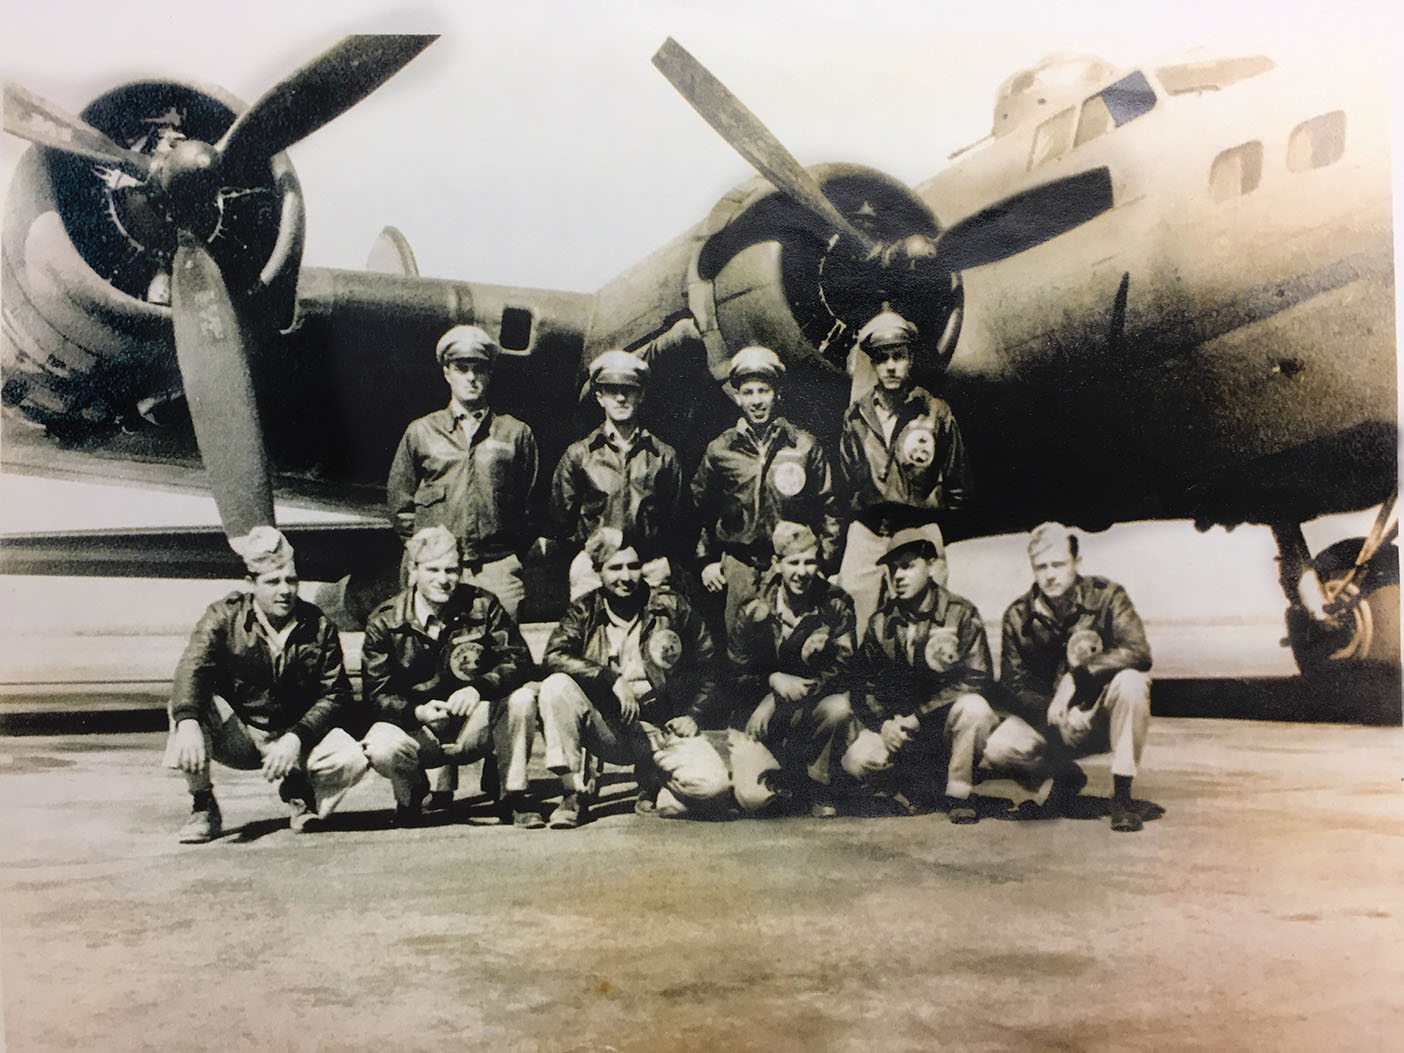 A WWII bomber crew posing in front of a B-17 bomber.